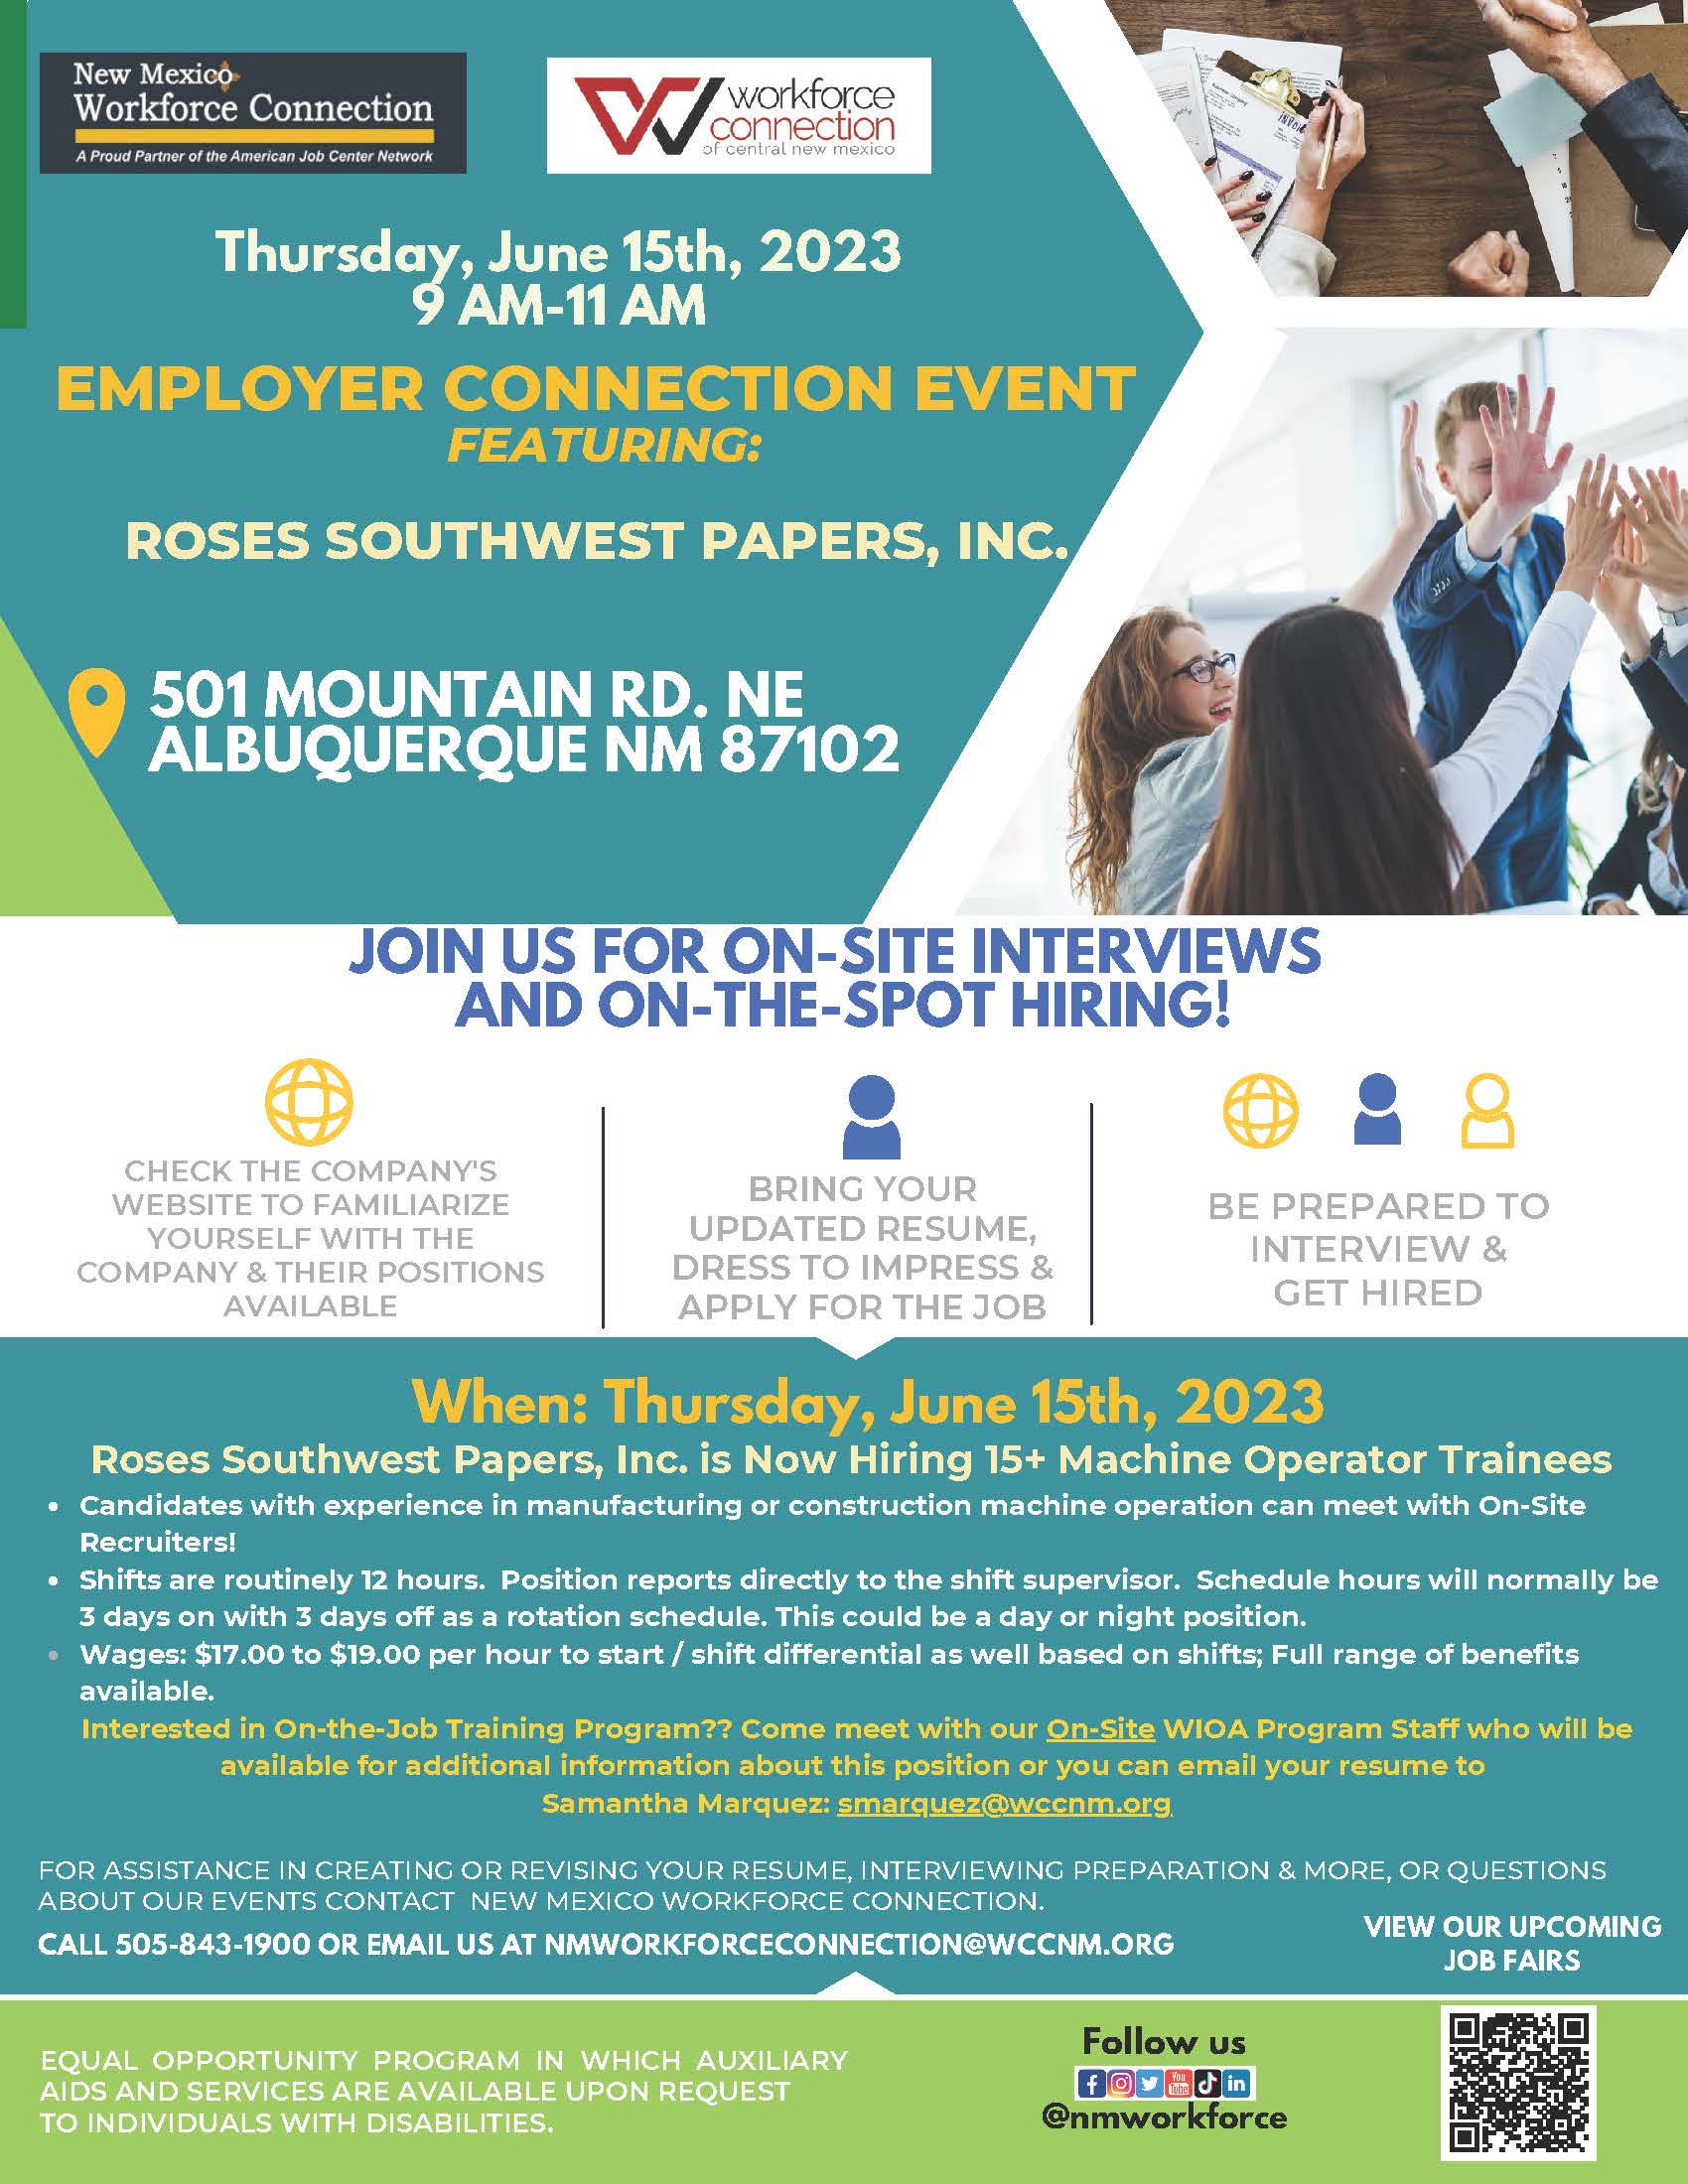 Employer Connection Event flyer